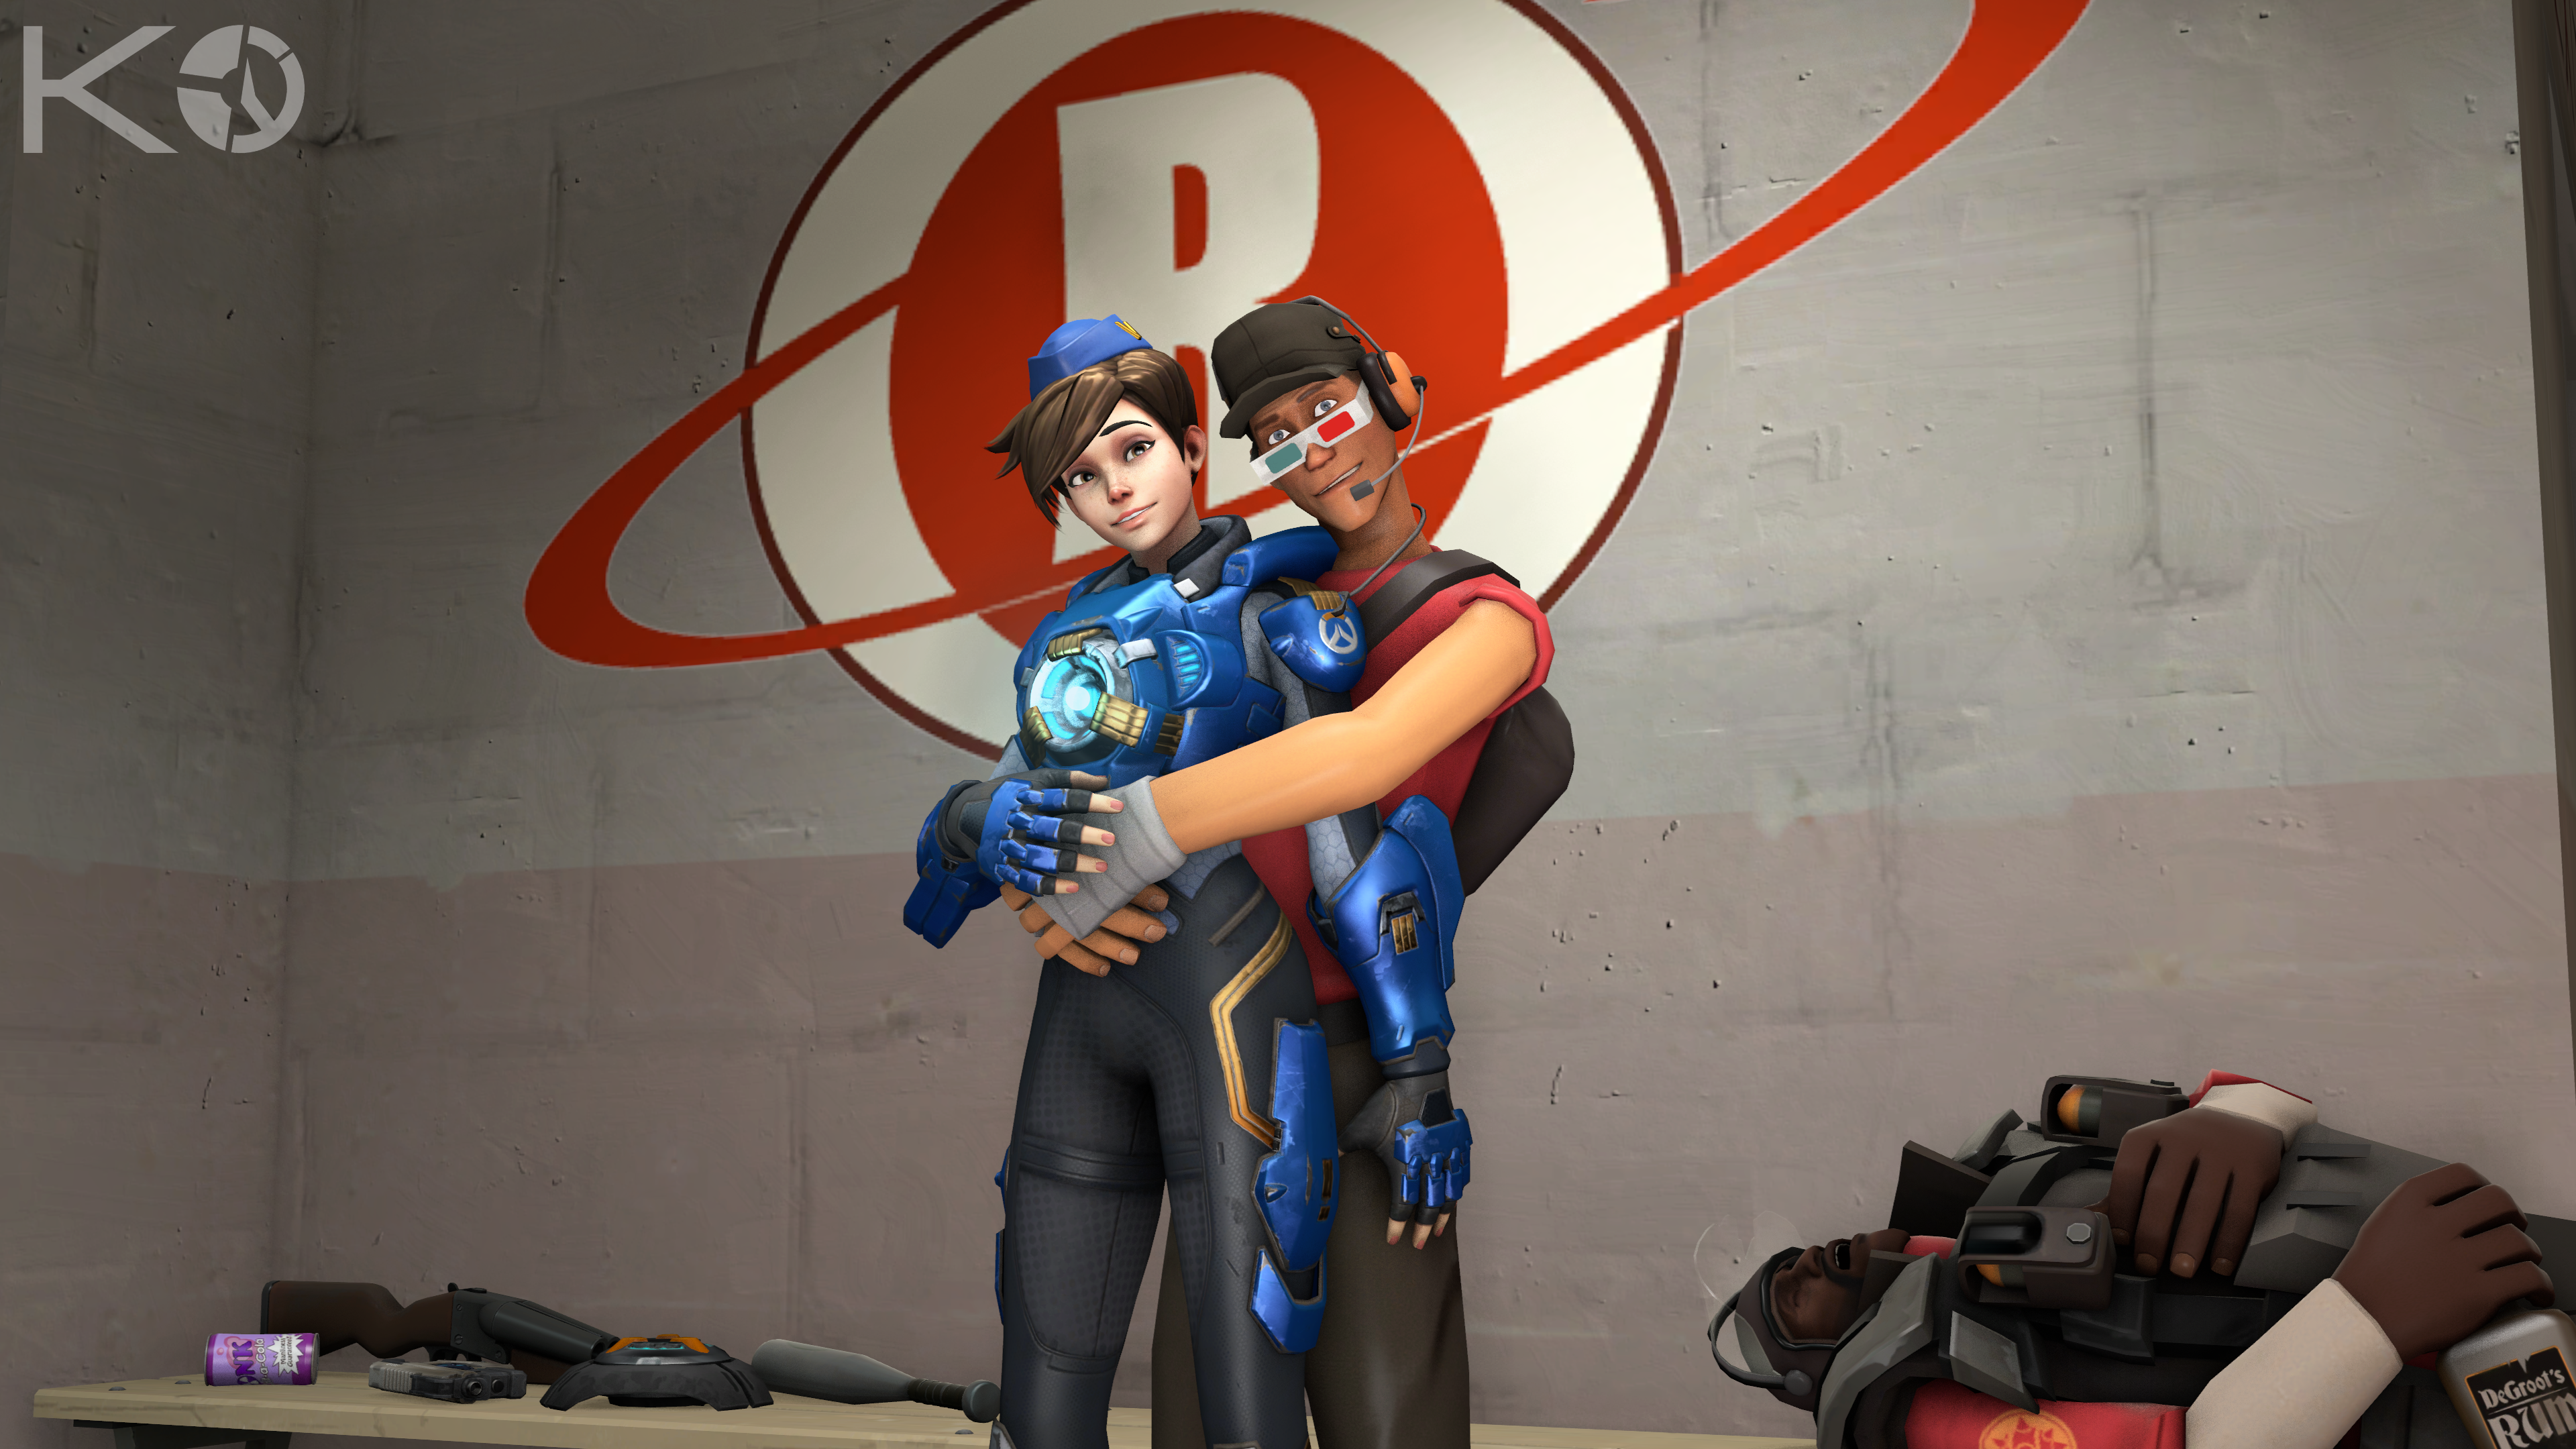 Scout Team Fortress Tracer Overwatch 3840x2160